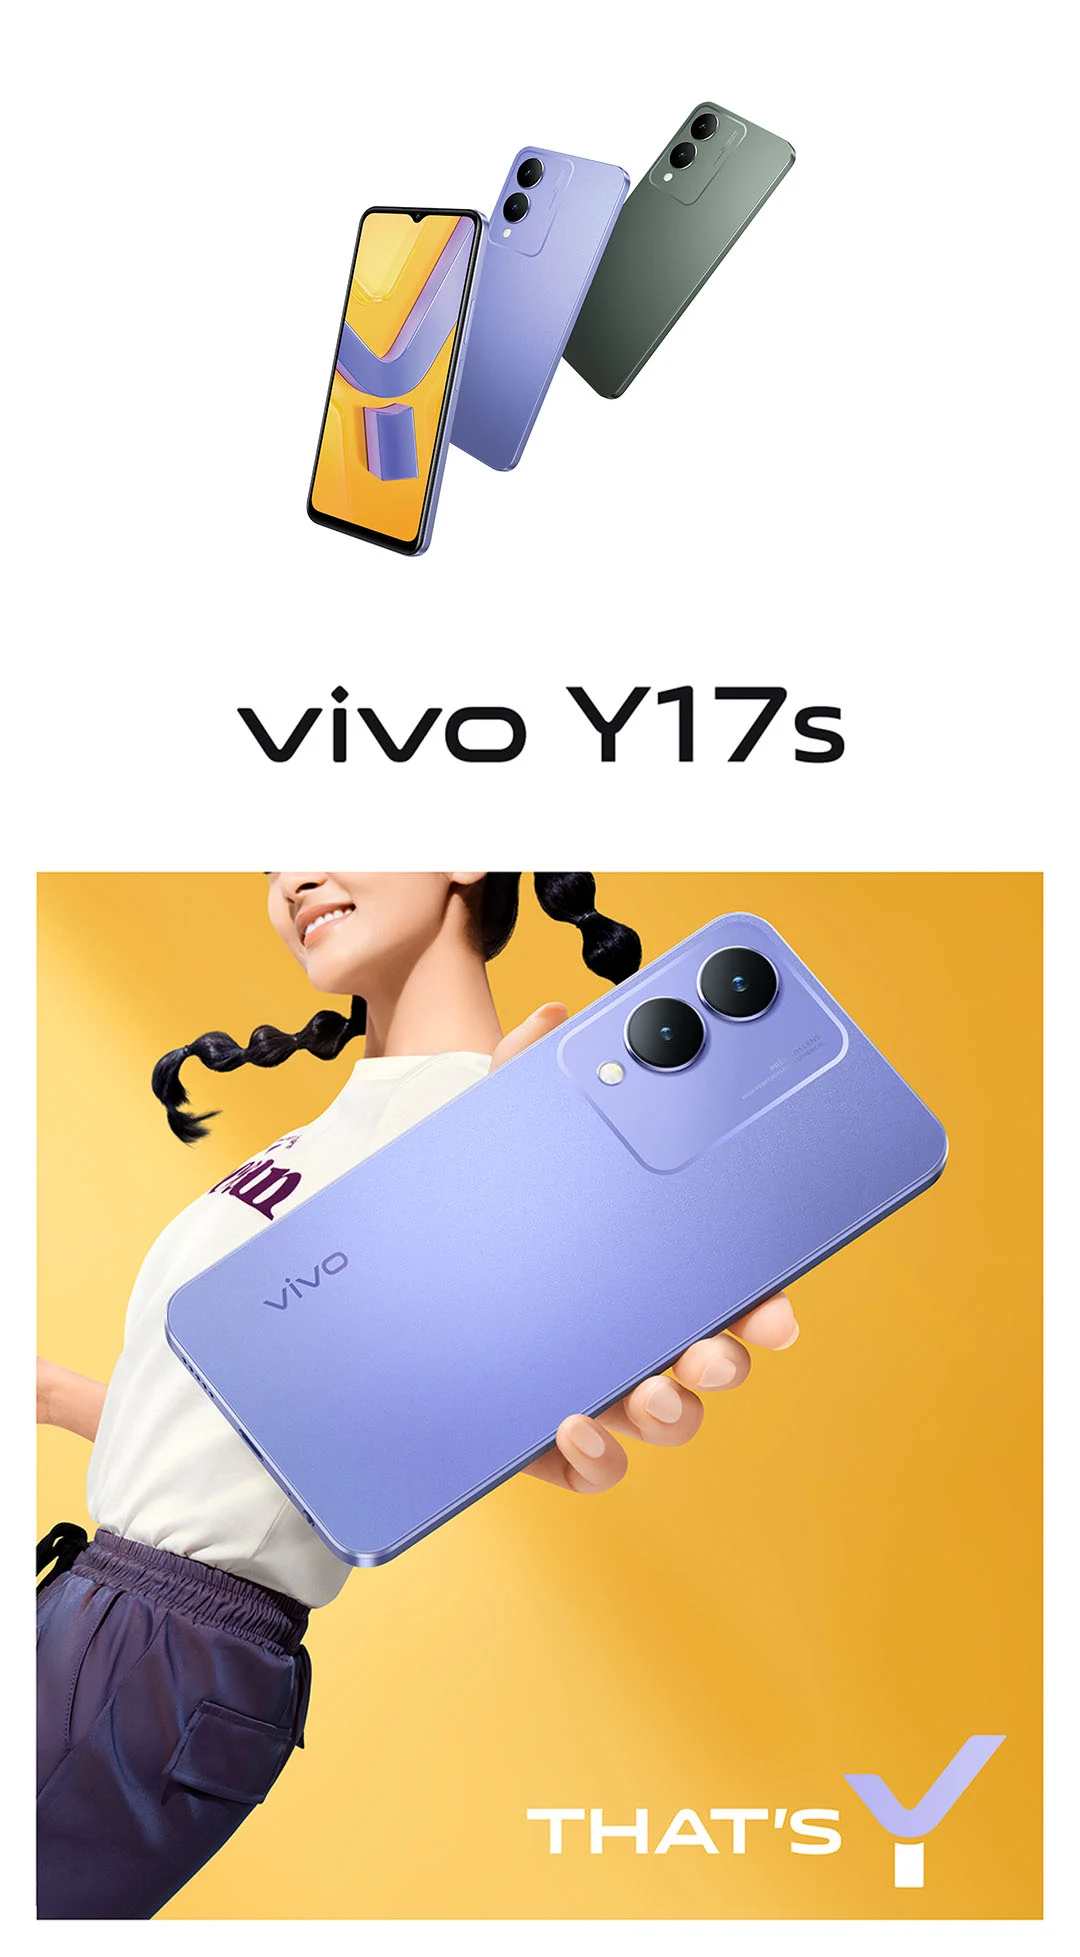 Vivo Y17s Now Available In Malaysia For RM599 